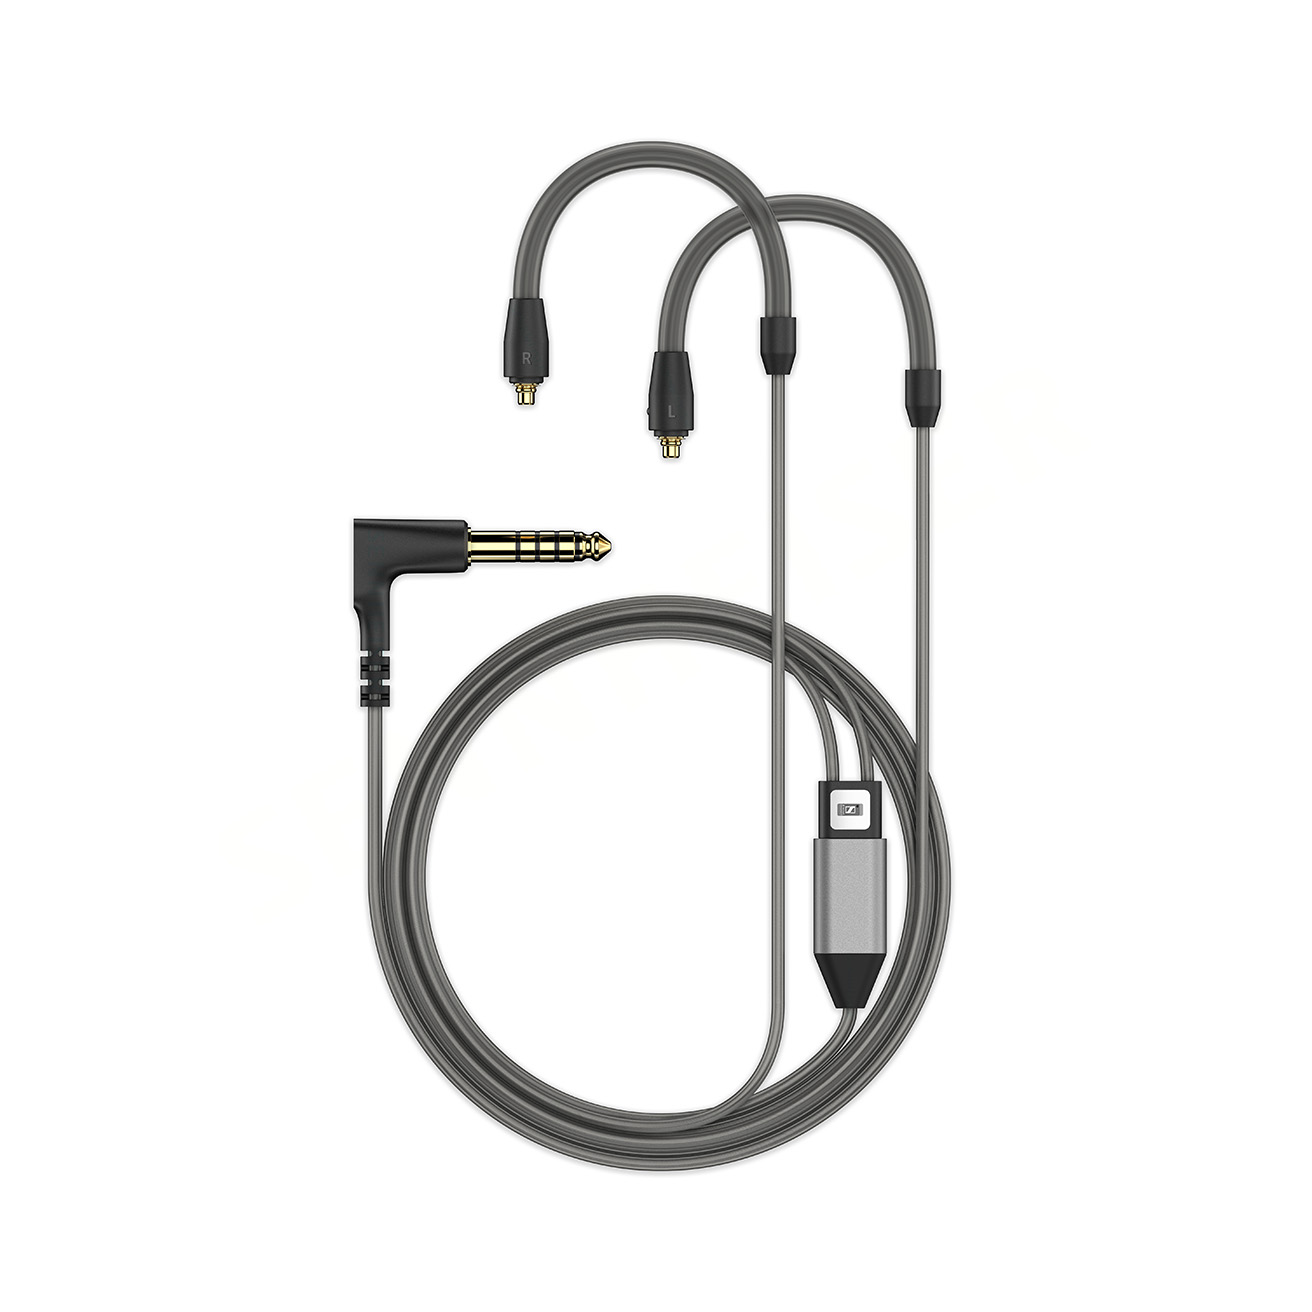 MMCX CABLE WITH 4.4 MM PLUG